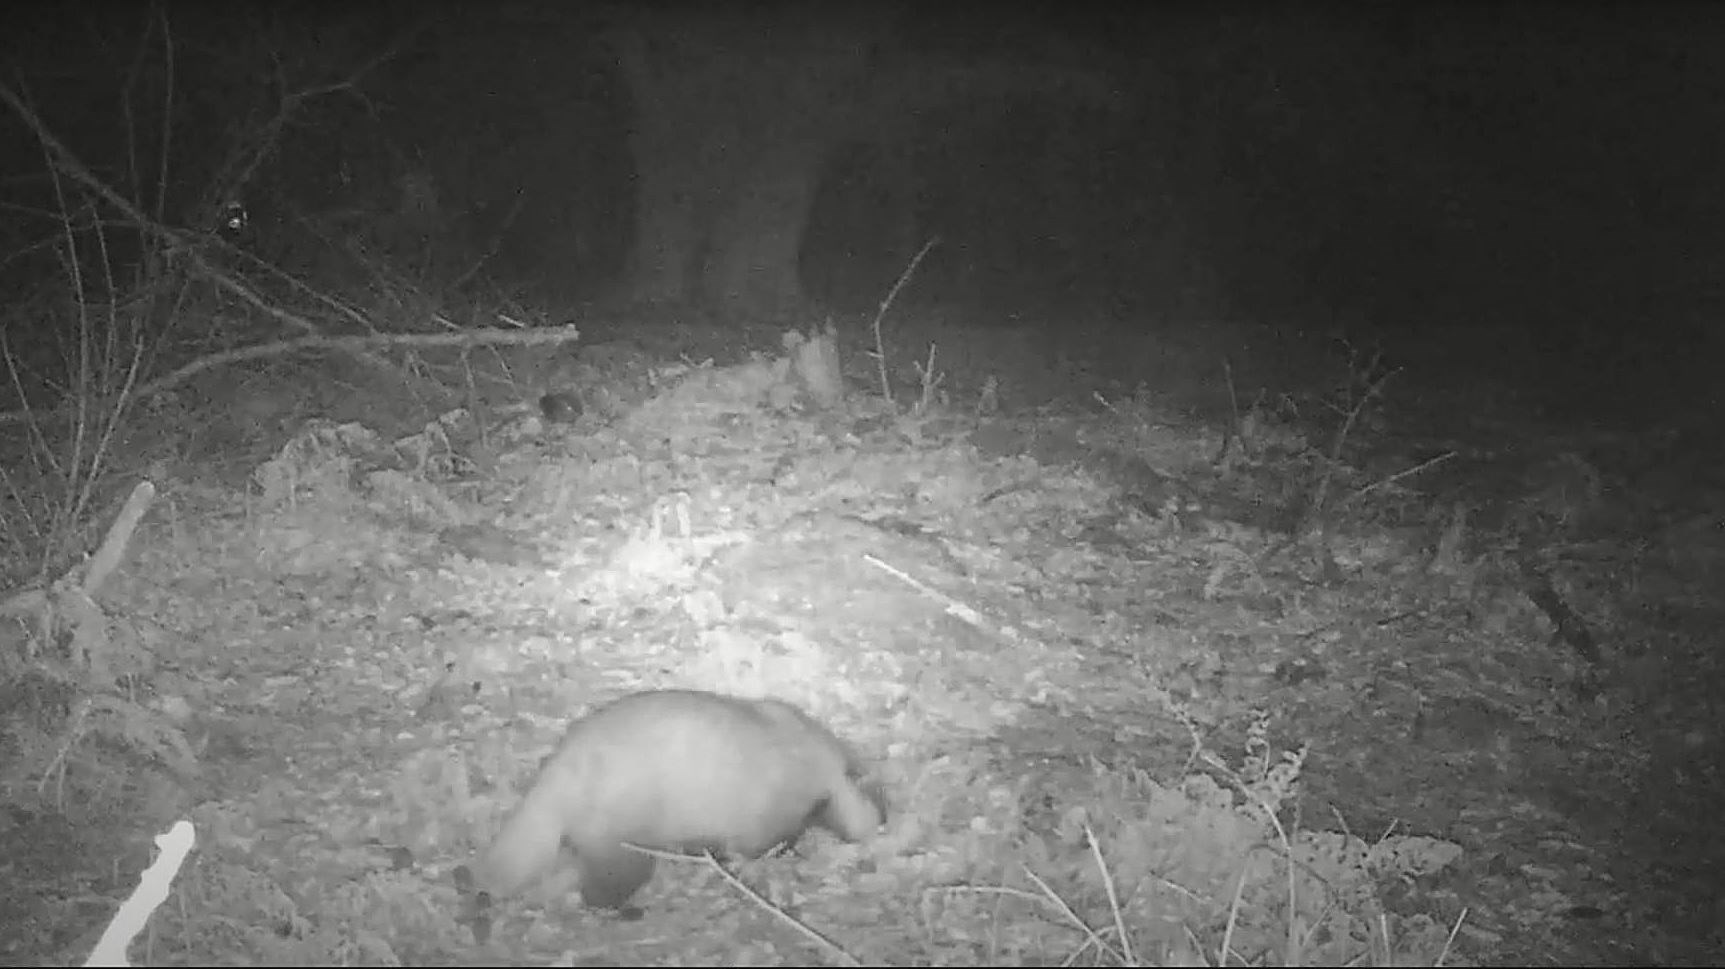 This image of the badger comes from the video filmed by Sophie Allan and her dad Robert.